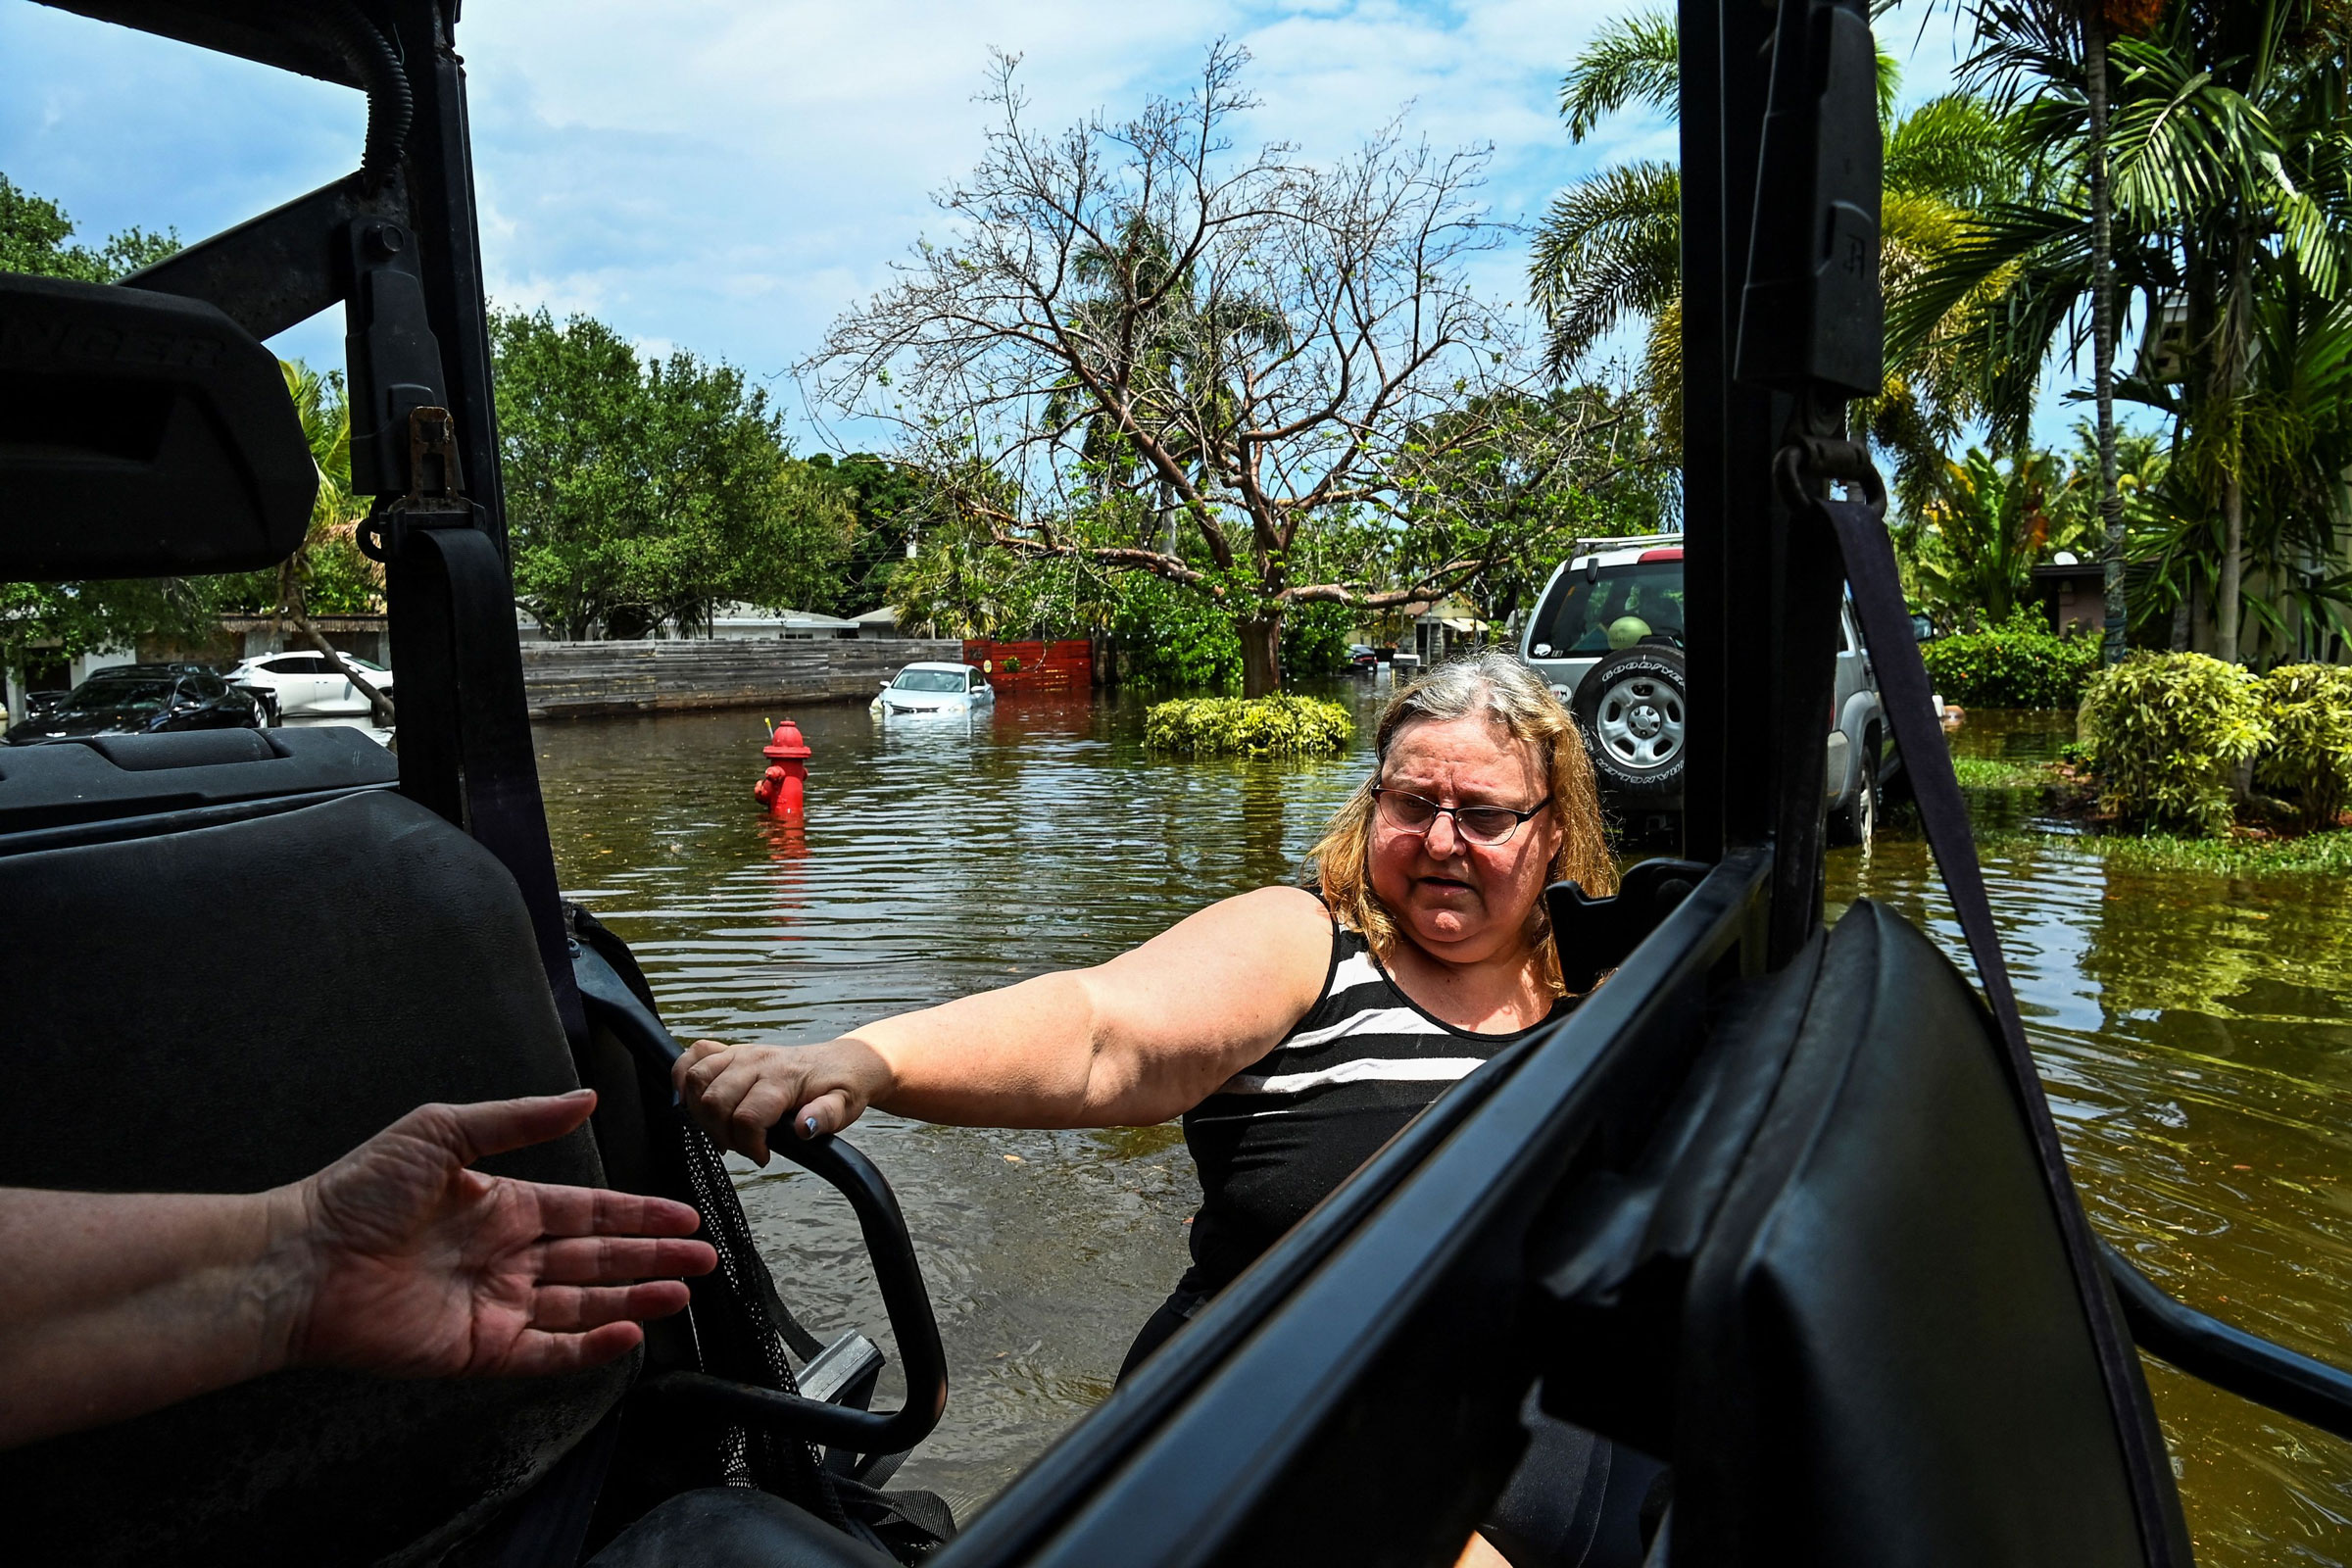 A woman is rescued by Florida Fish and Wildlife Conservation law enforcement, on the flooded street after heavy rain in Fort Lauderdale